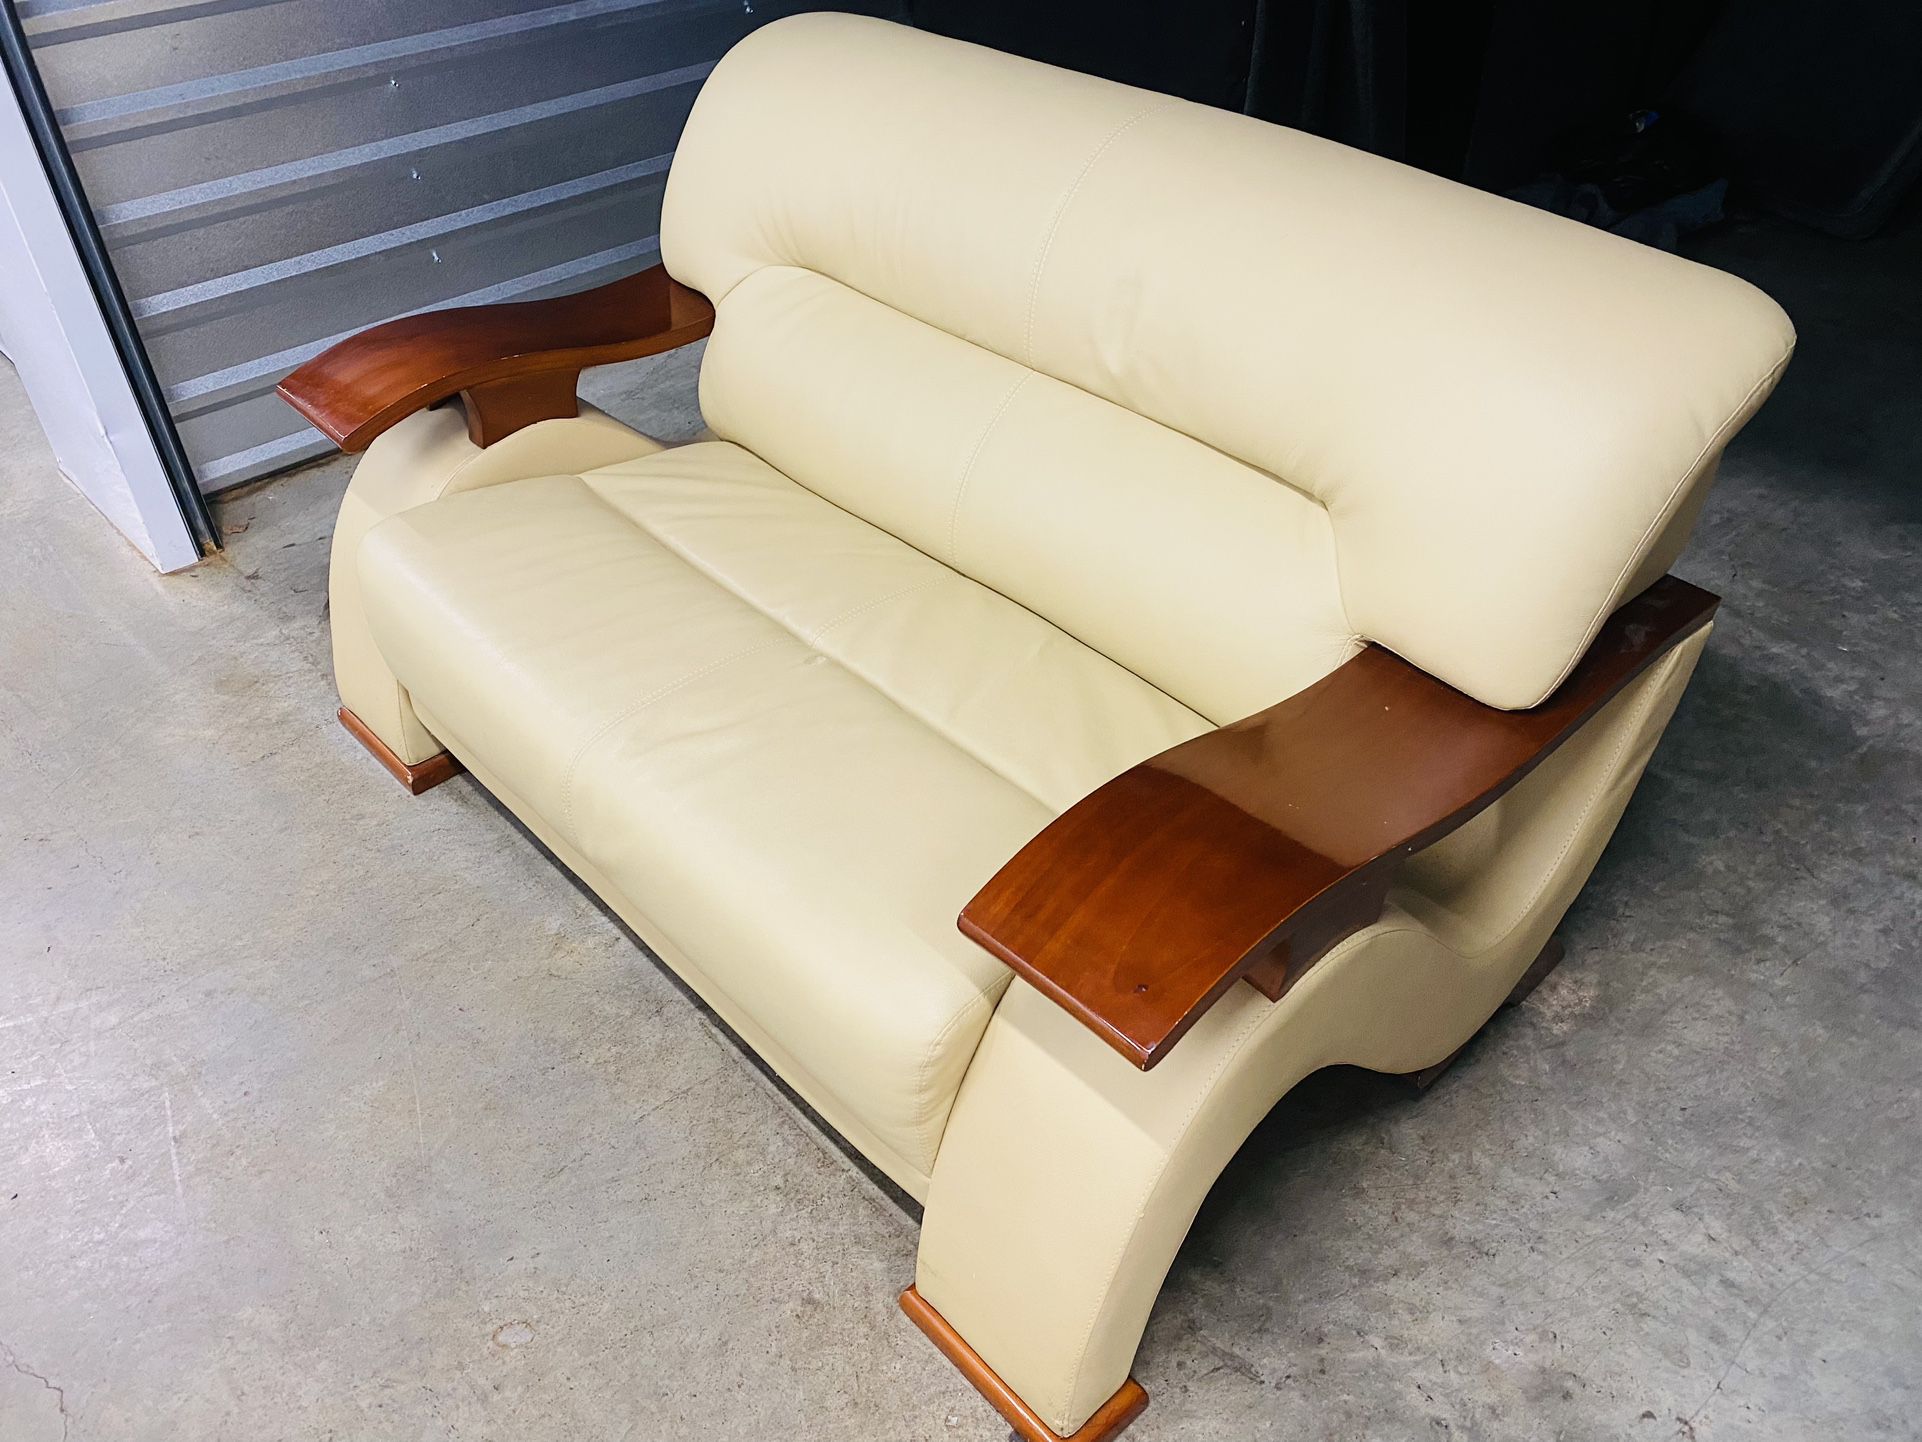 FREE DELIVERY - Raymour & Flanigan Cream Leather Loveseat Metro Style (Look my profile for more)